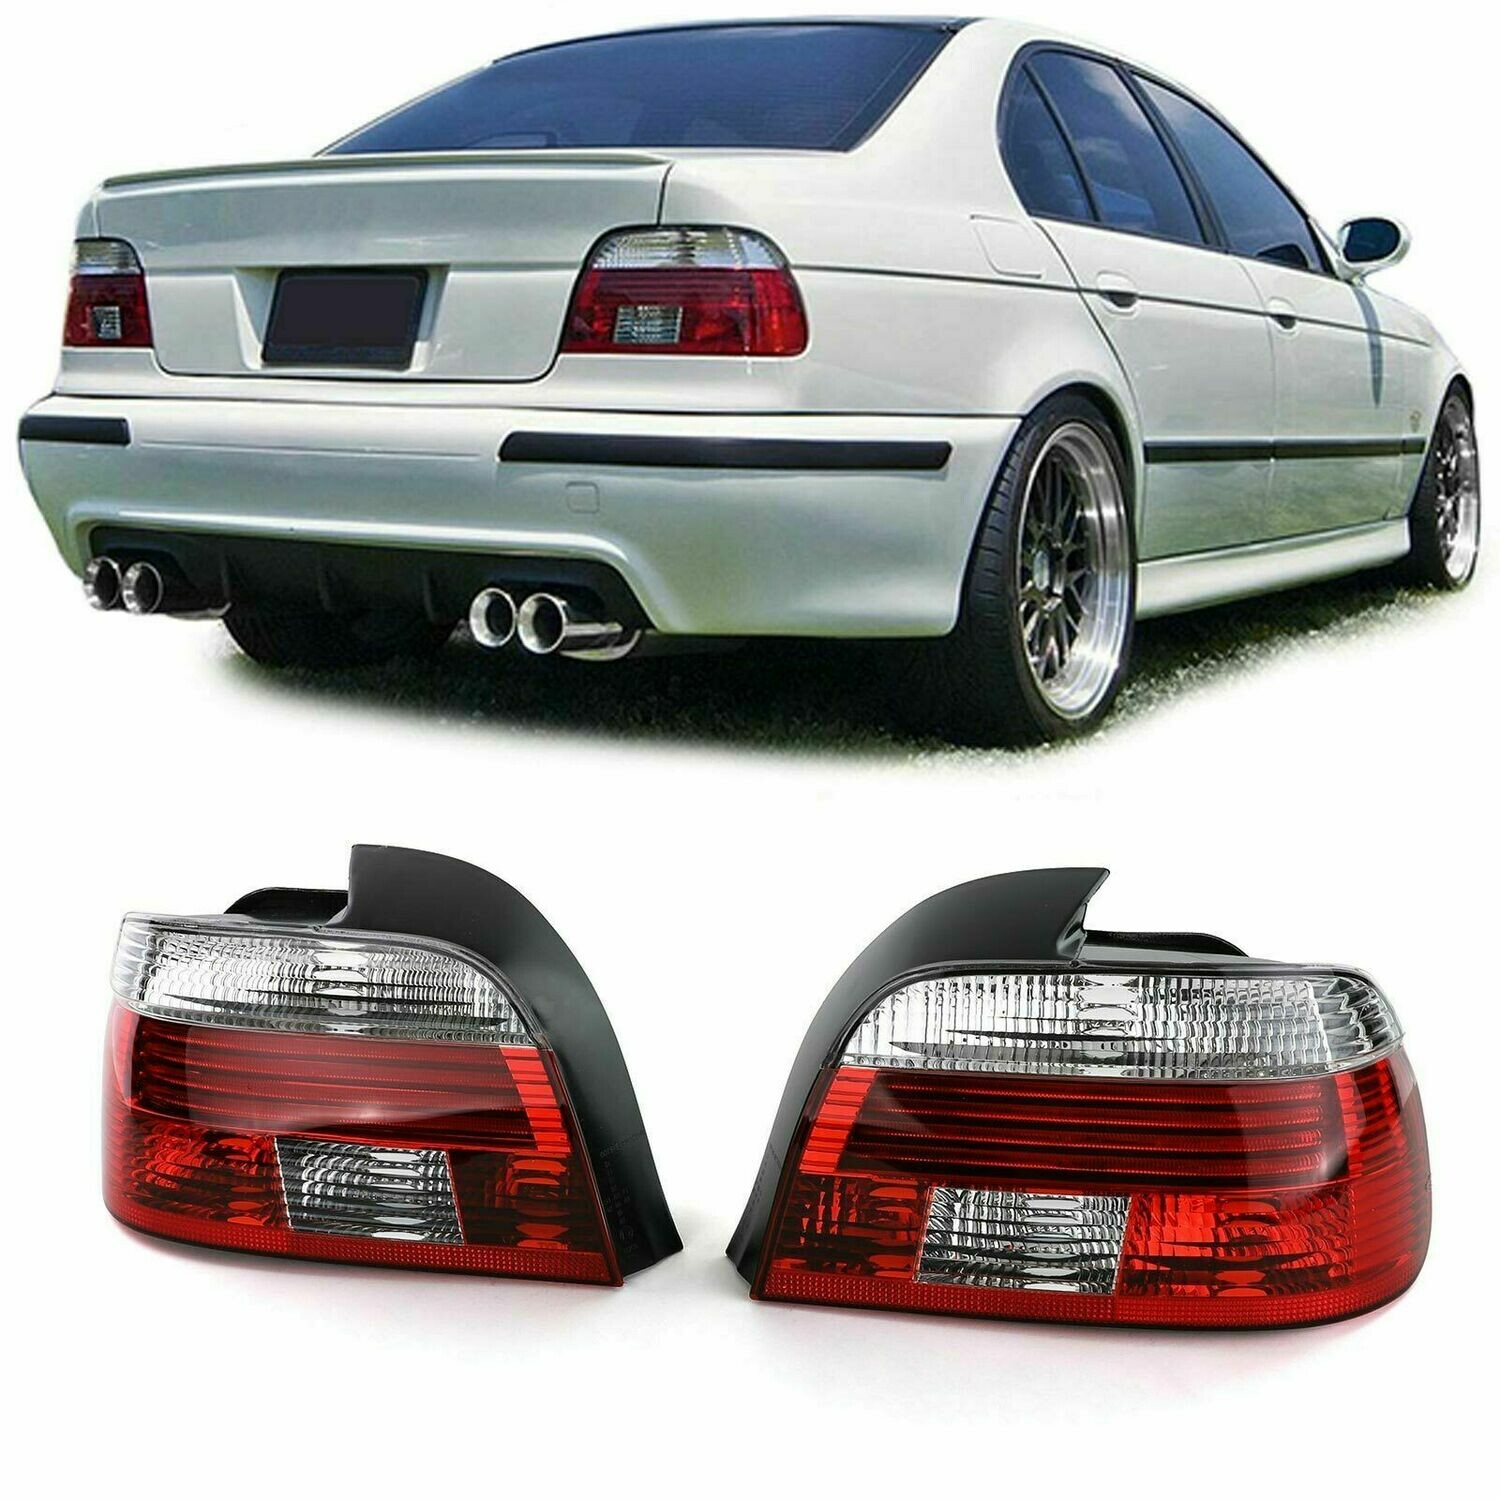 Rear Lights RED WHITE CRISTAL for BMW E39 00-03 SERIES 5 NEW